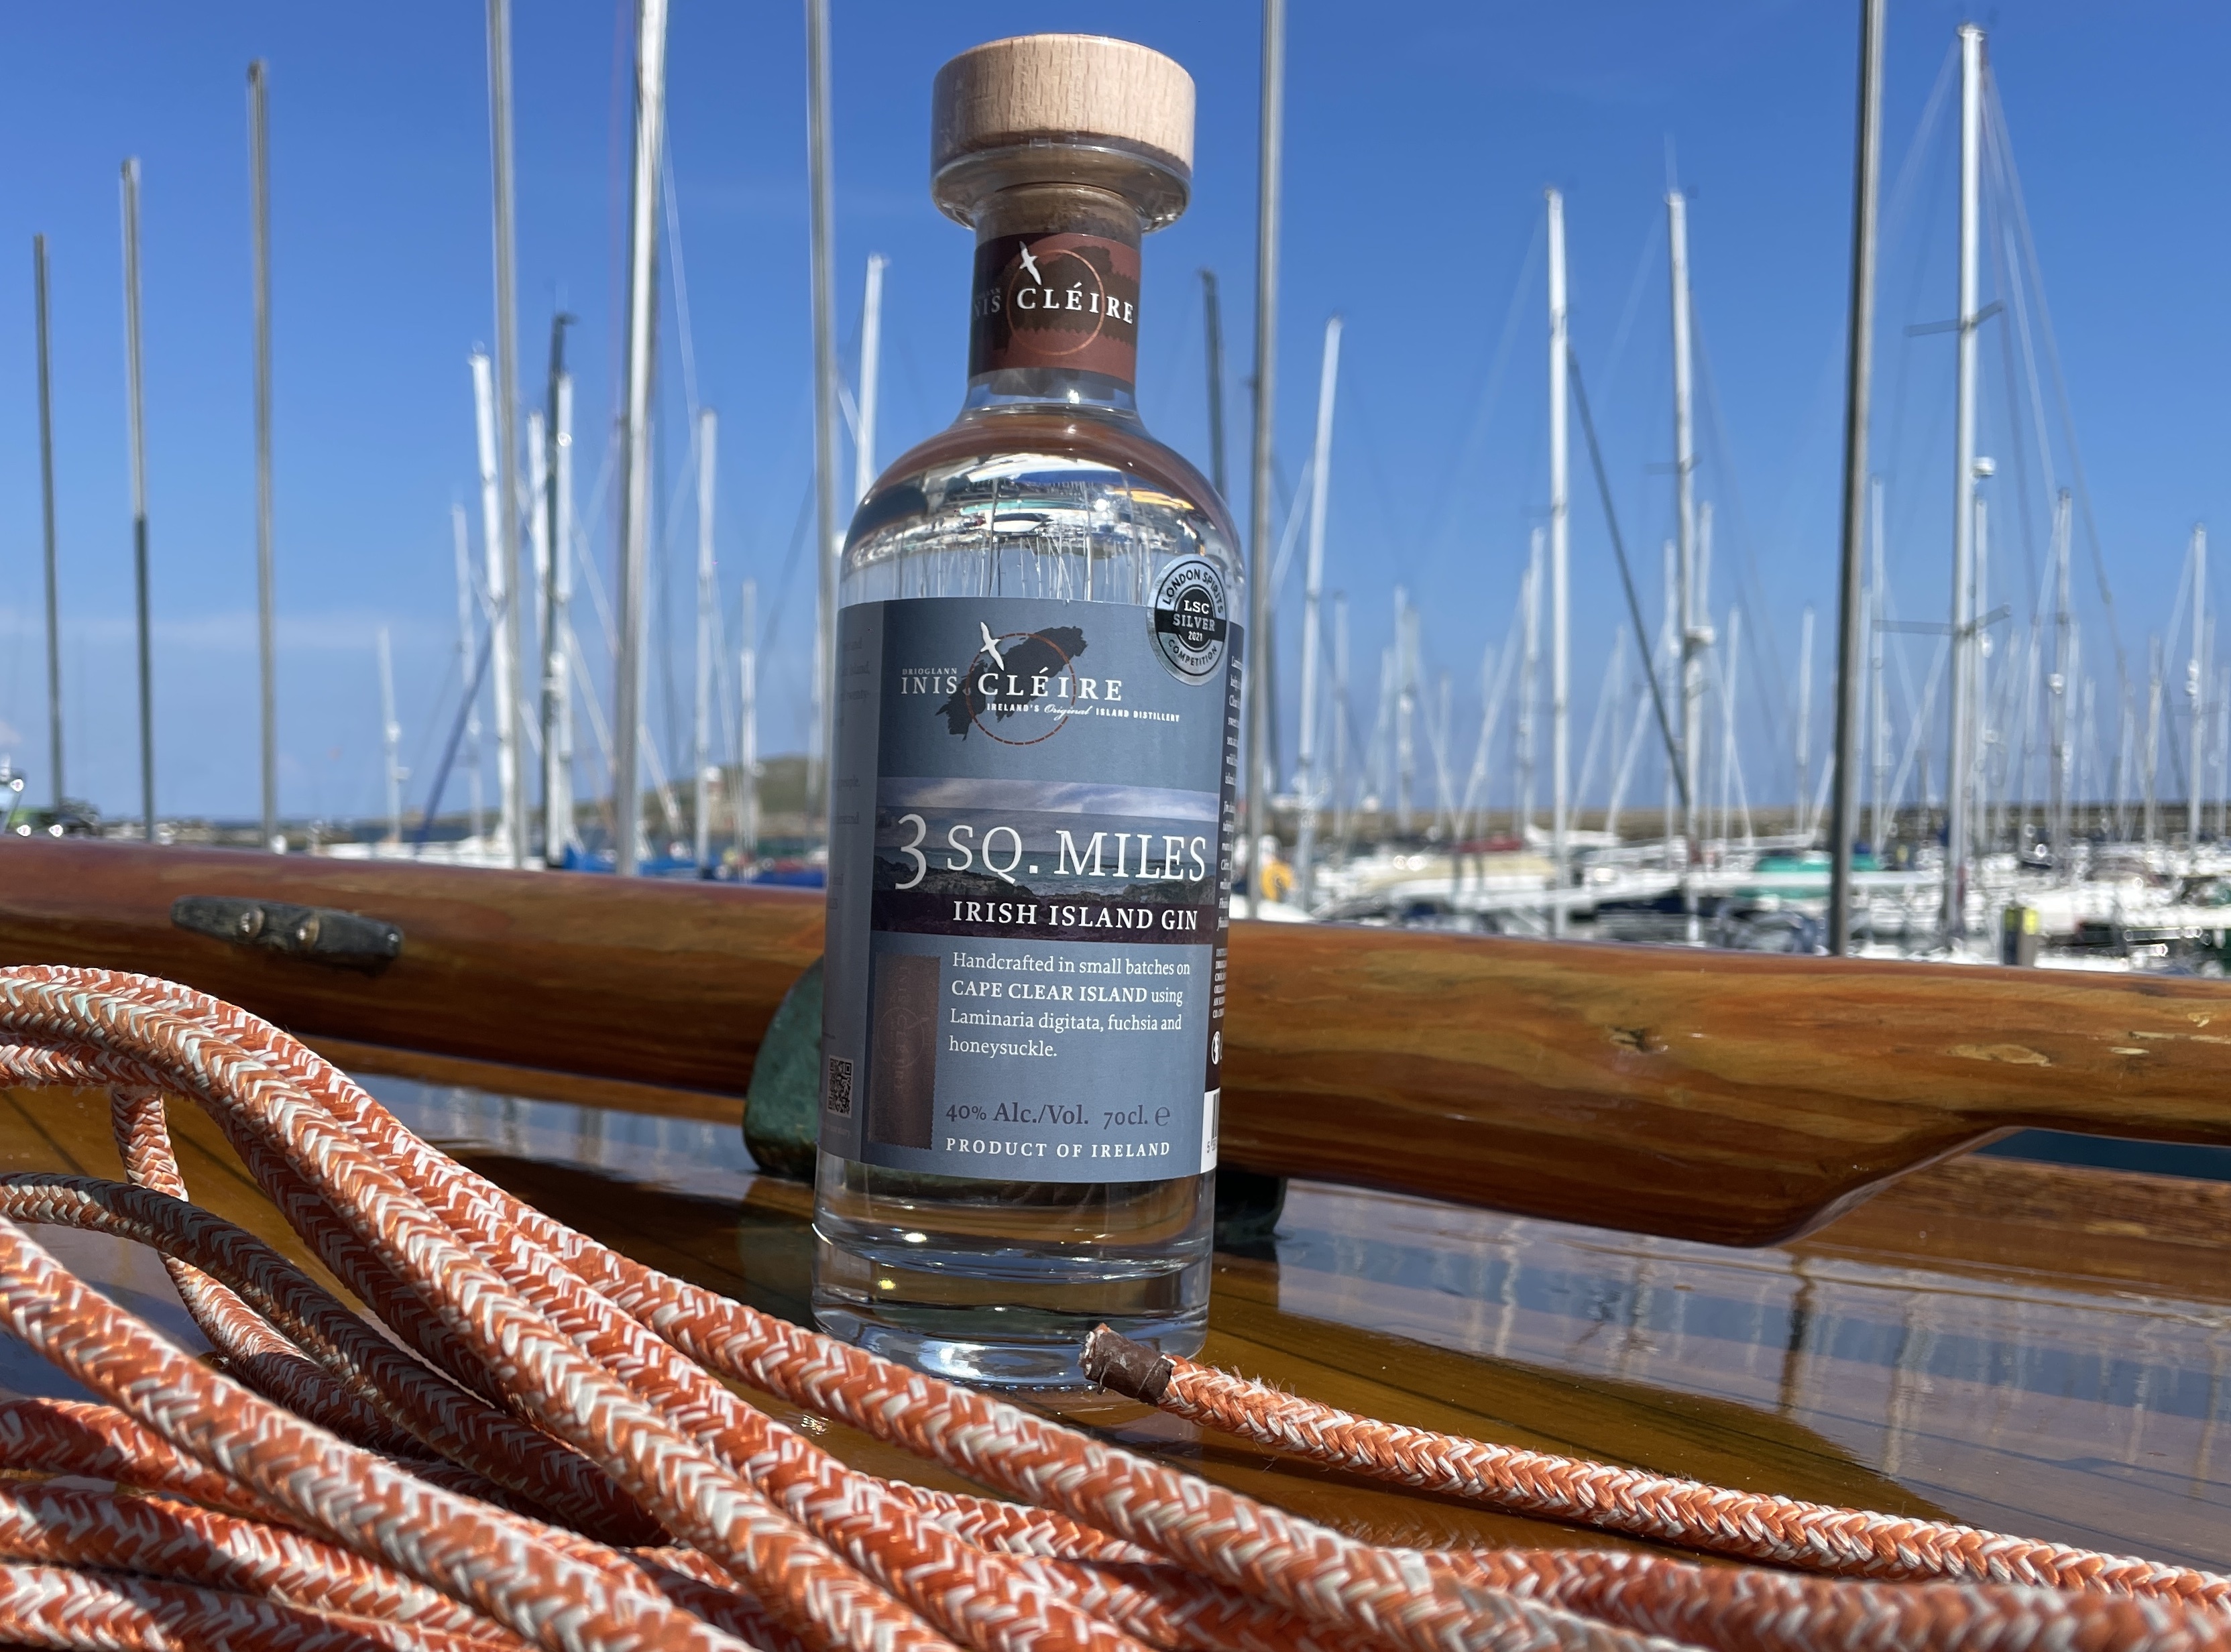 Cape Clear Distillery's '3 Sq Miles Gin' - will be enjoyed at the party on June 28th on Cape Clear Island